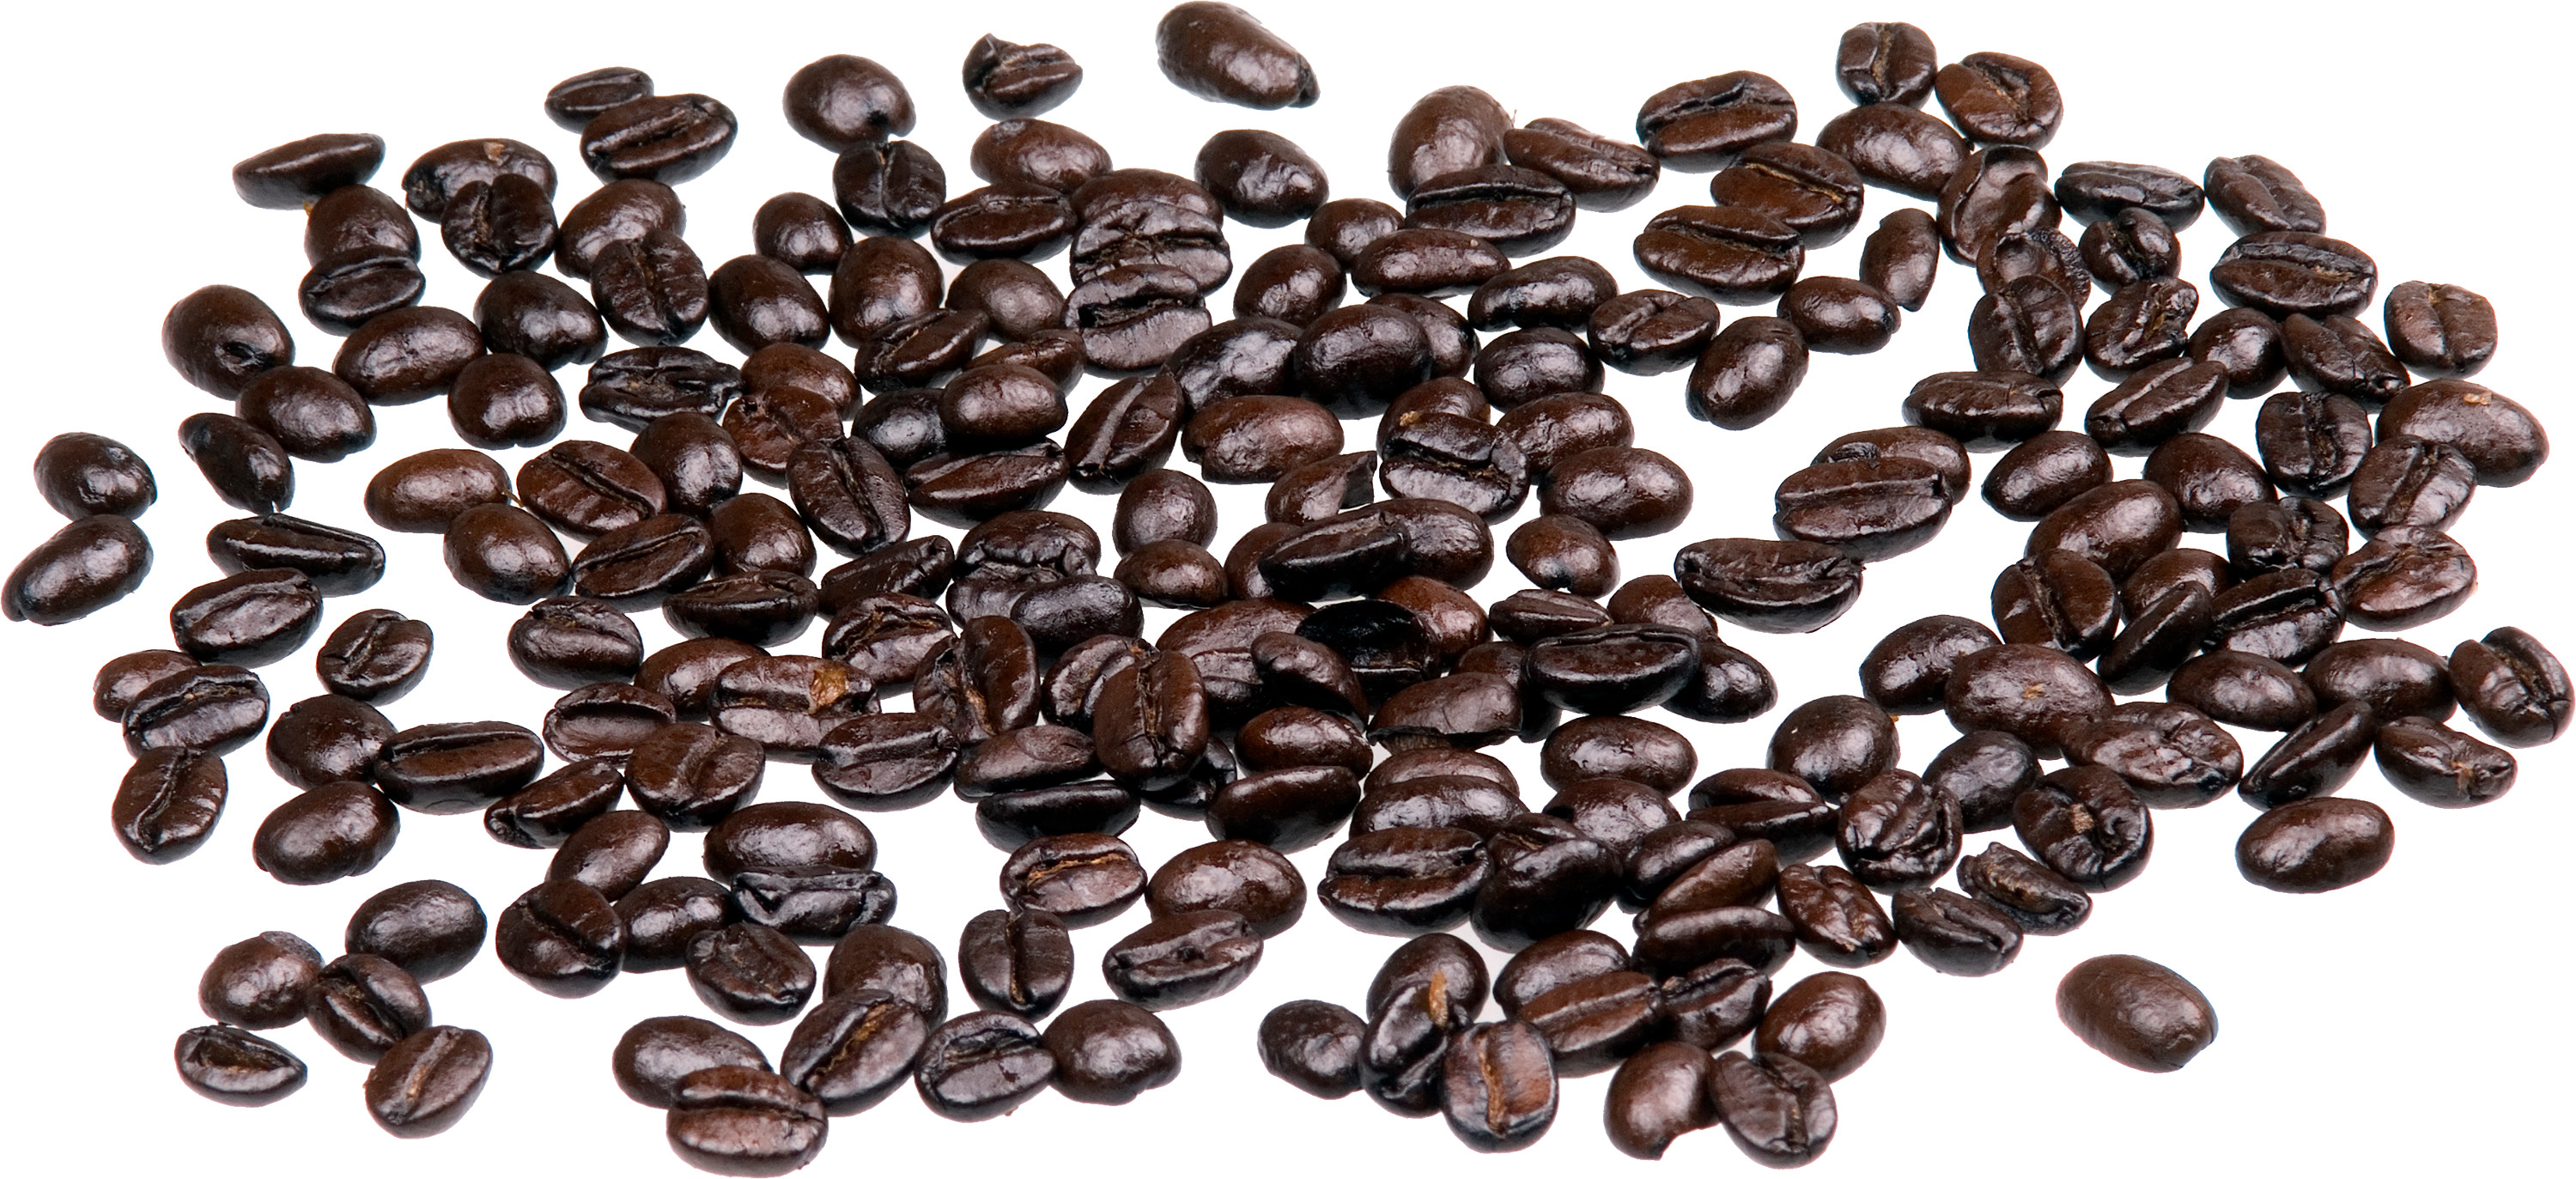 Coffee Beans Background ·① WallpaperTag